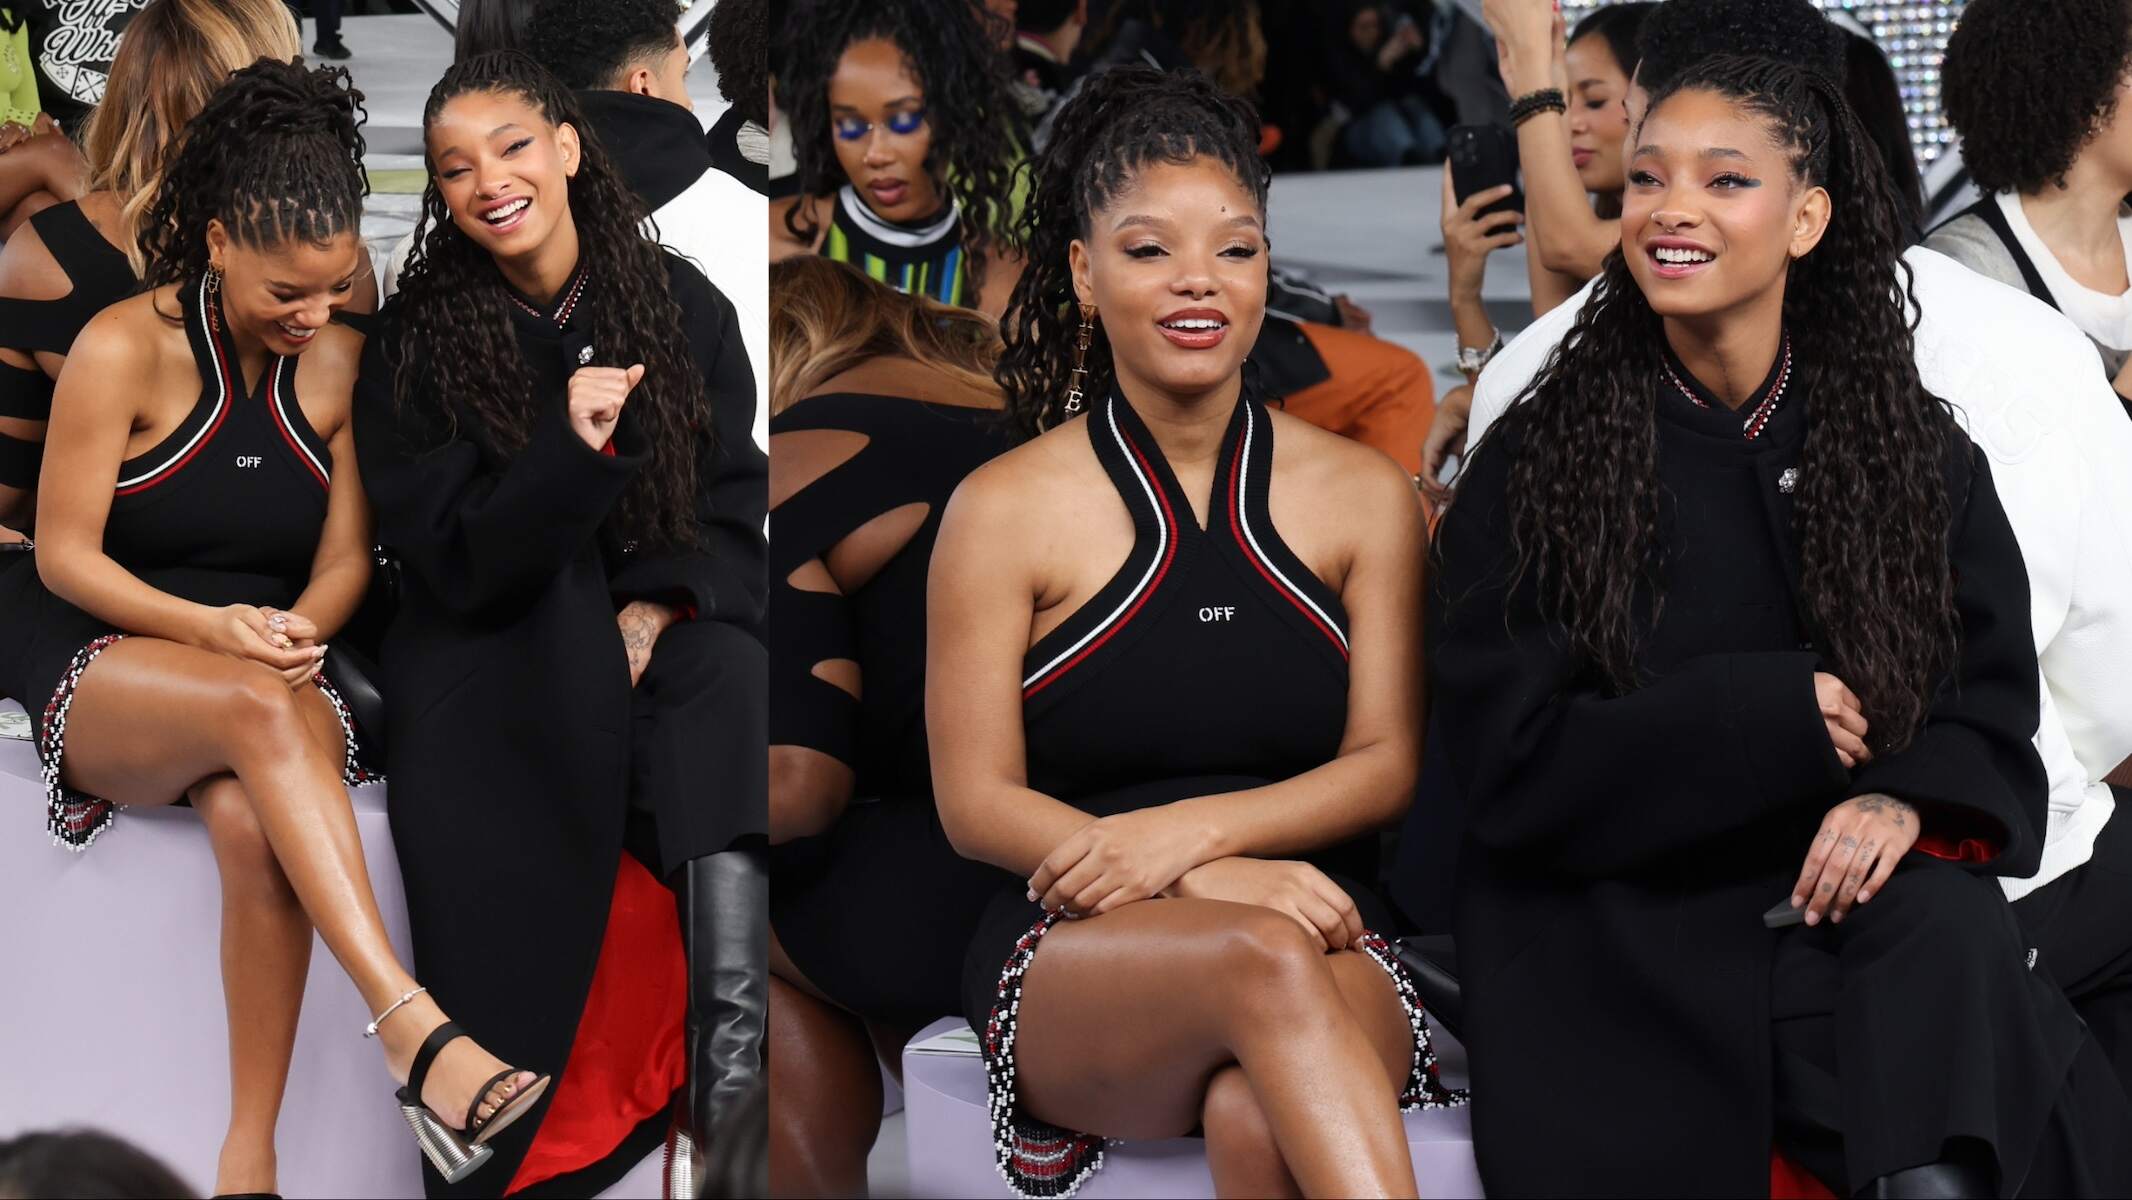 Actors Halle Bailey and Willow Smith laugh together in the front row for the Off White runway show in matching outfits